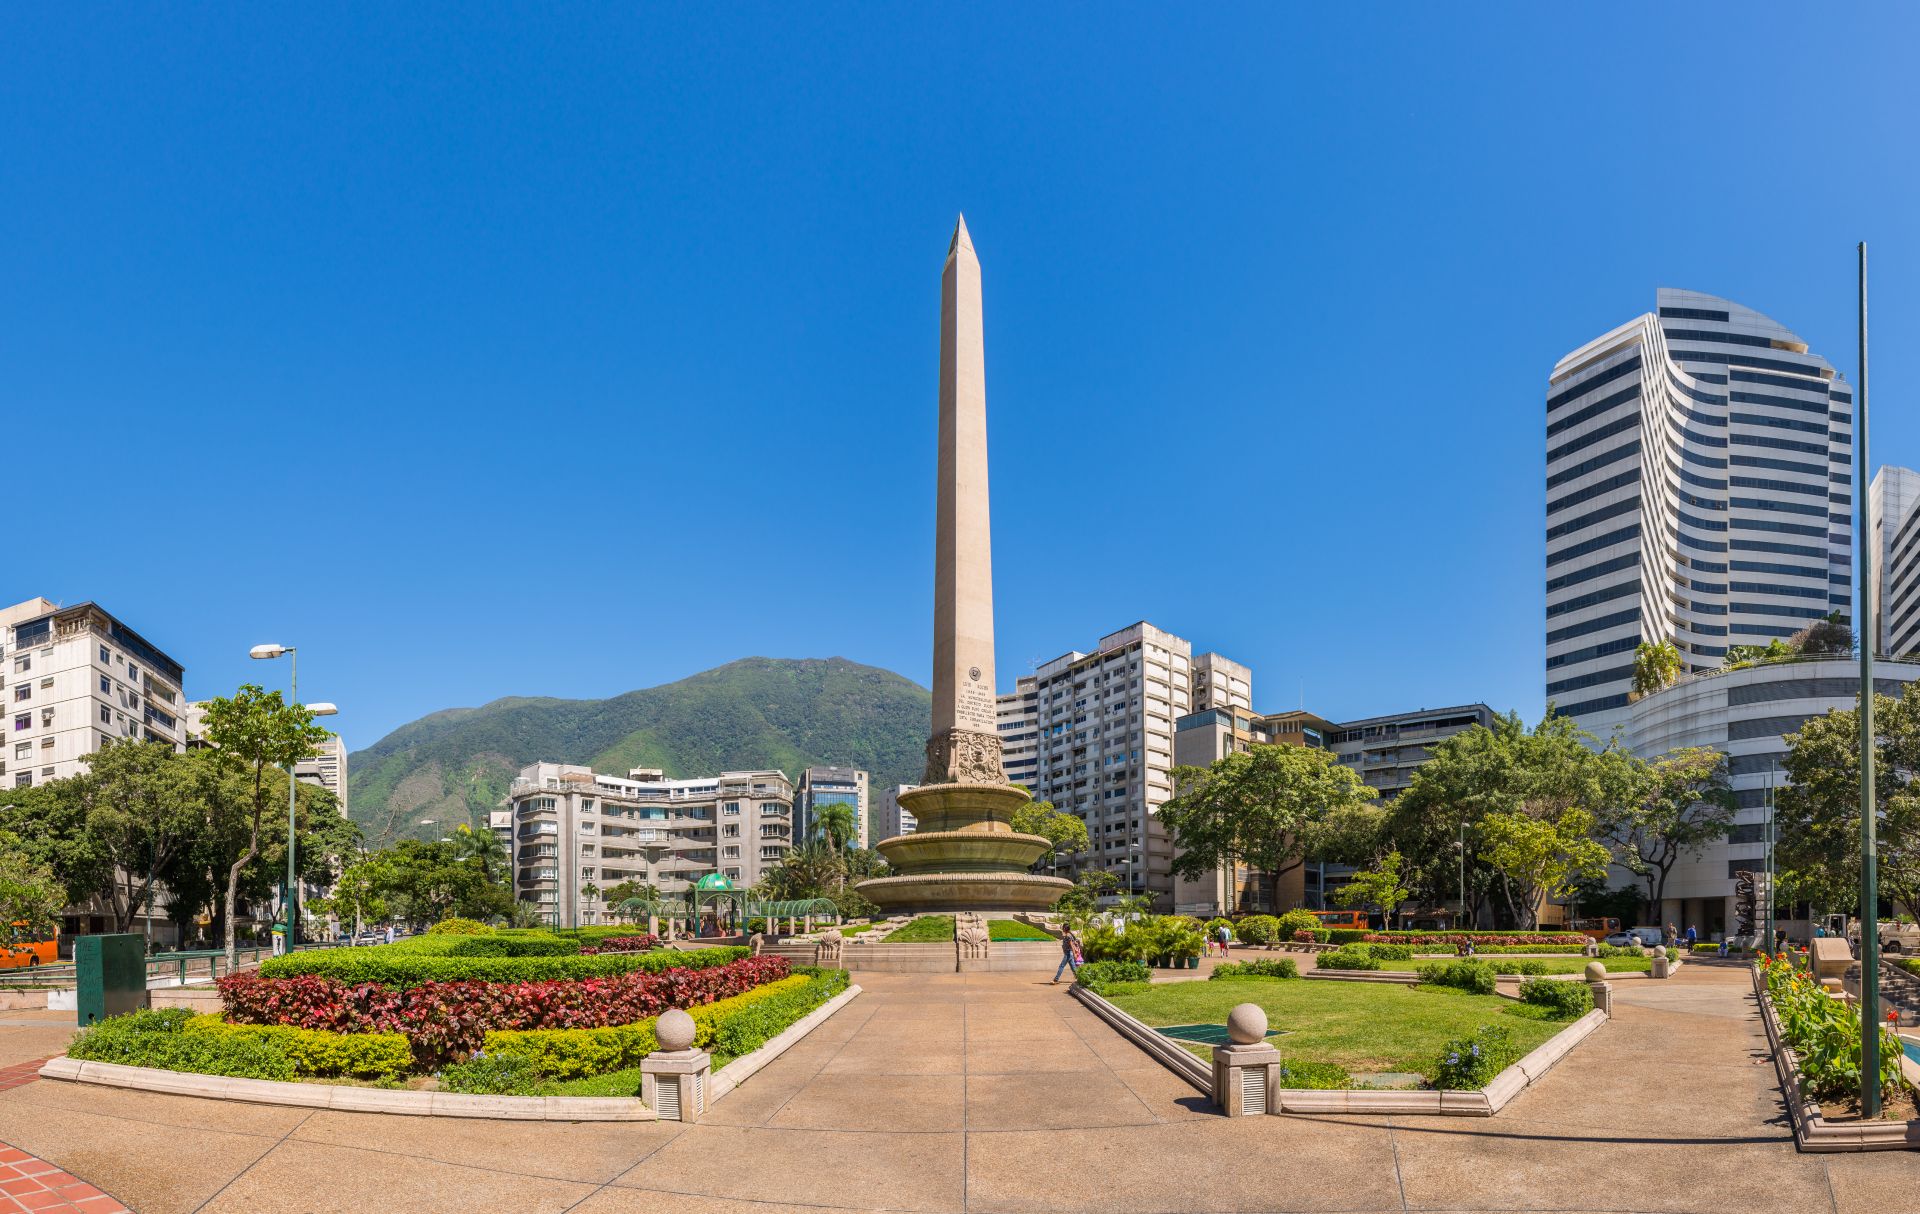 Plaza Francia (also known as Altamira Square), in Caracas, the capital of Venezuela